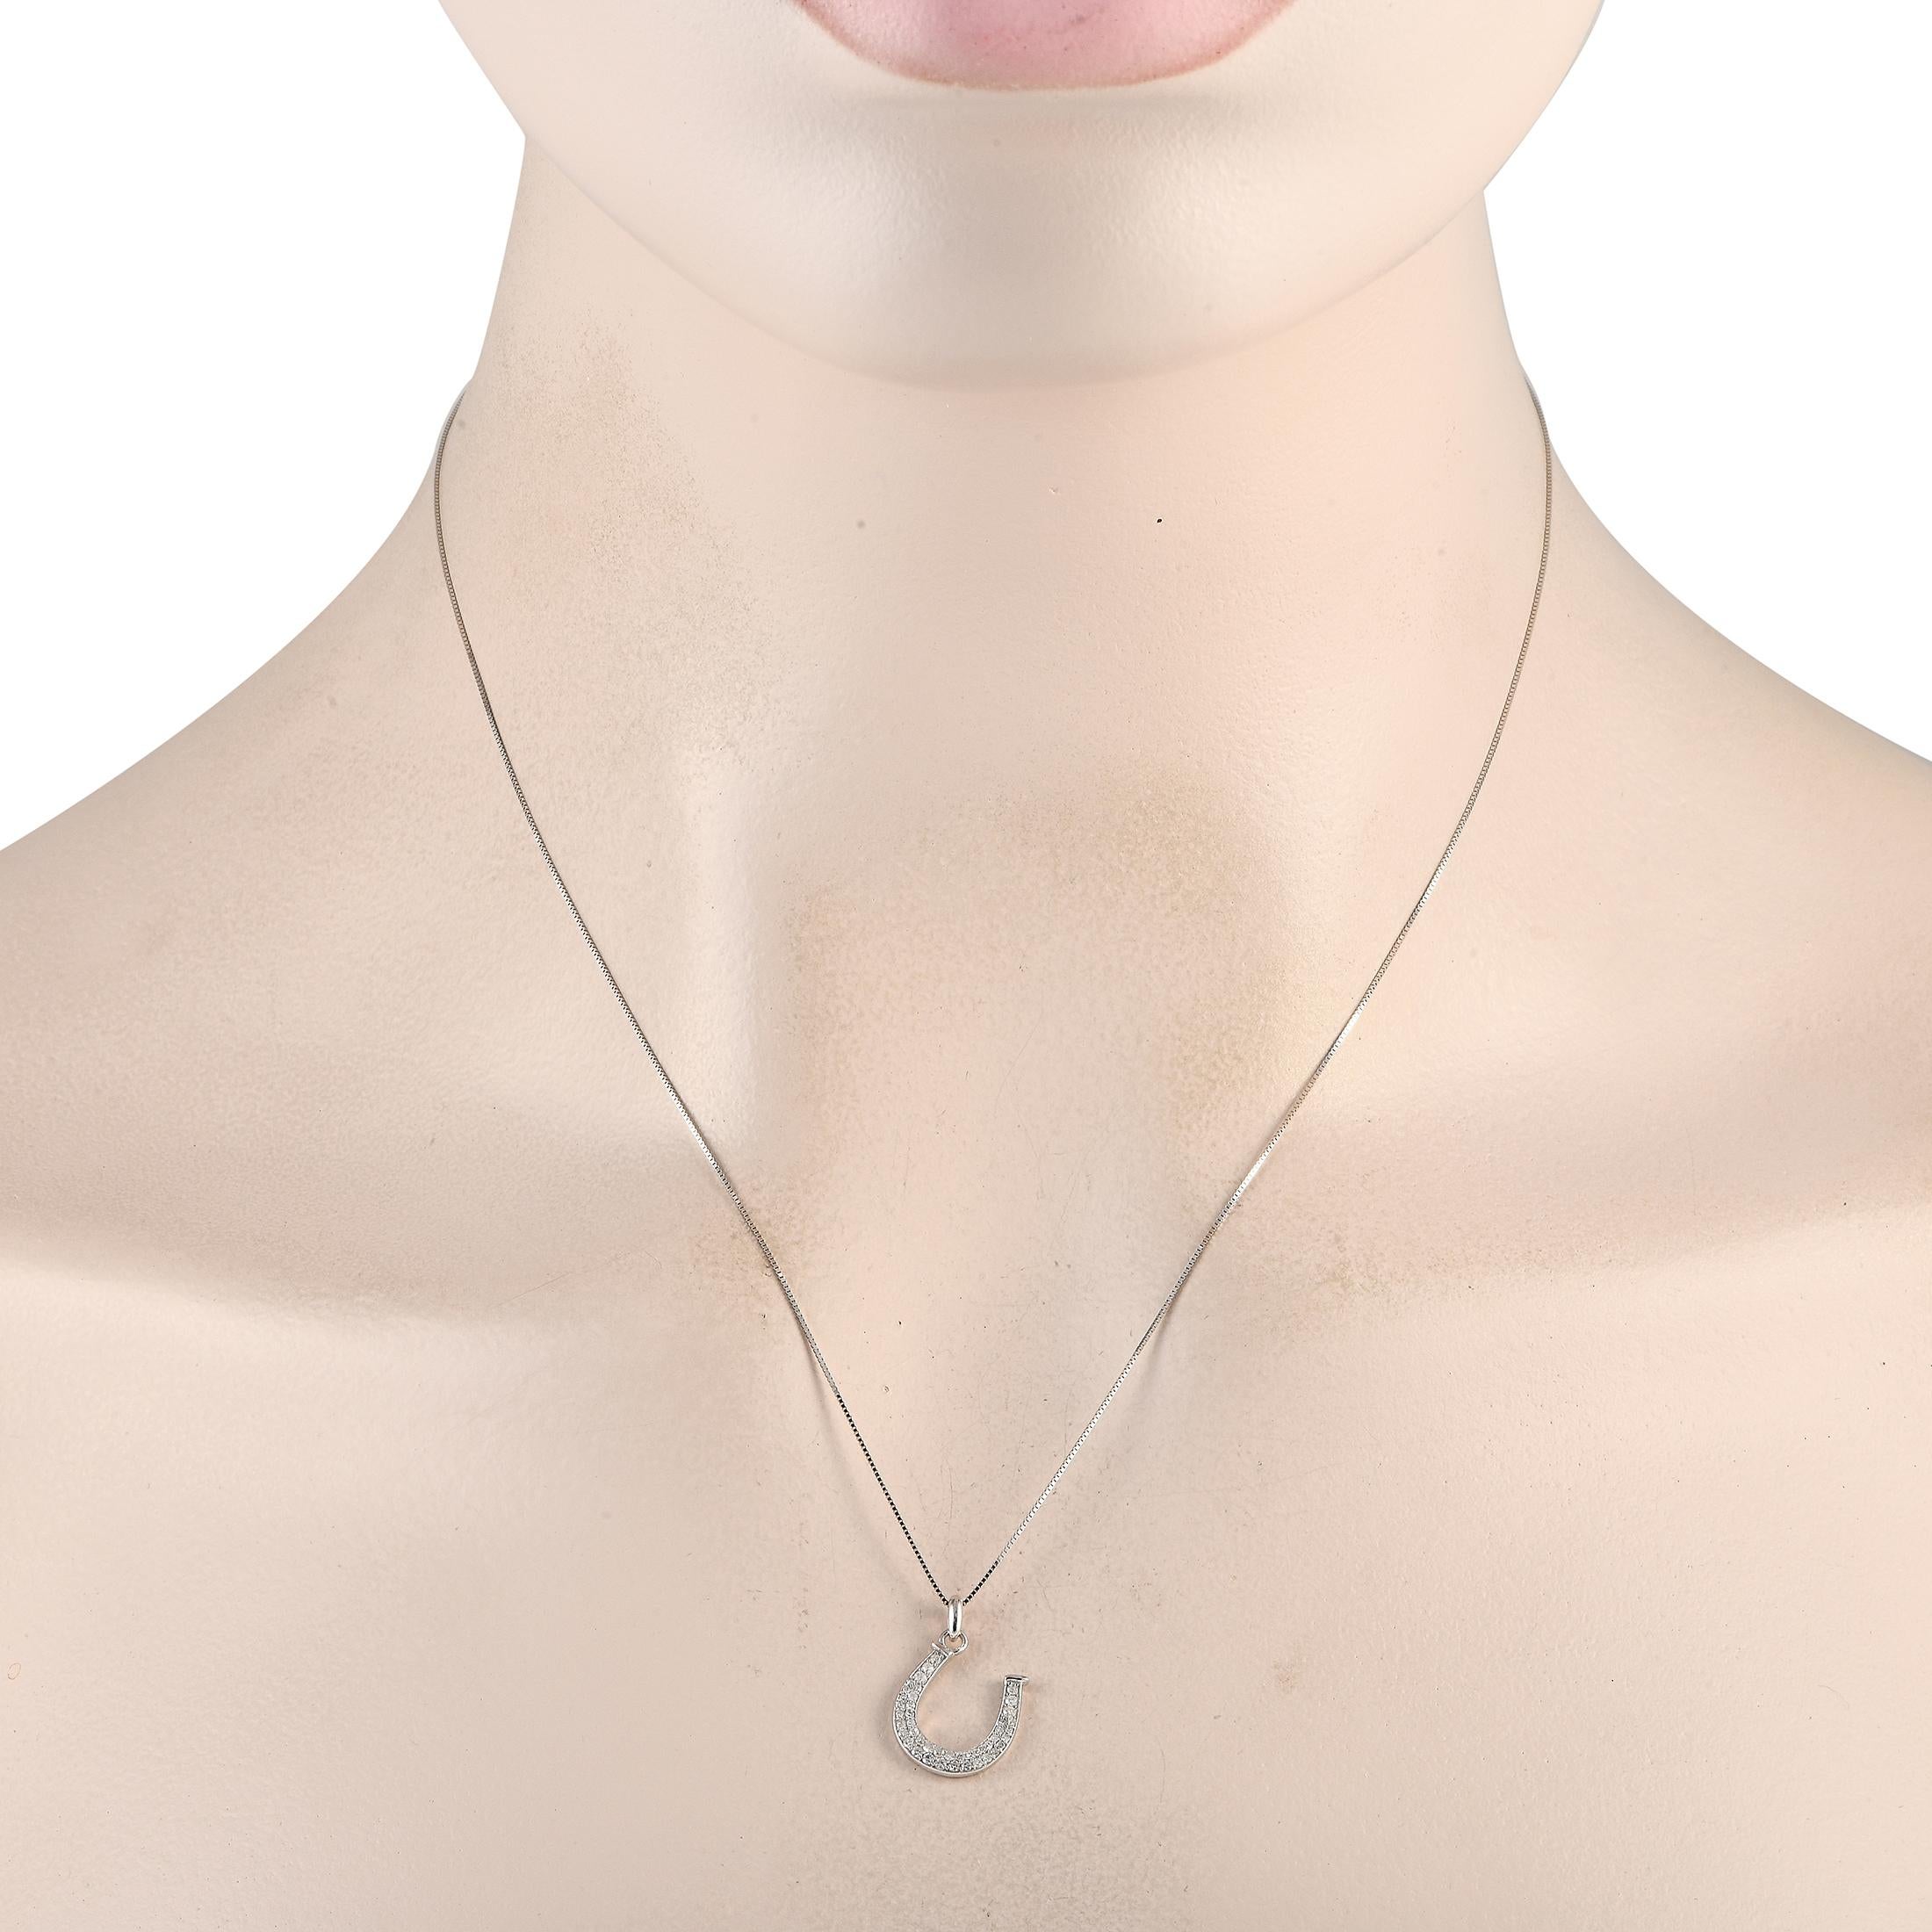 Add a dash of good luck to any ensemble with this timeless necklace. A horseshoe shaped pendant measuring 0.75 long by 0.50 wide comes to life thanks to Diamond accents totaling 0.18 carats. Crafted from 14K White Gold, it comes complete with a